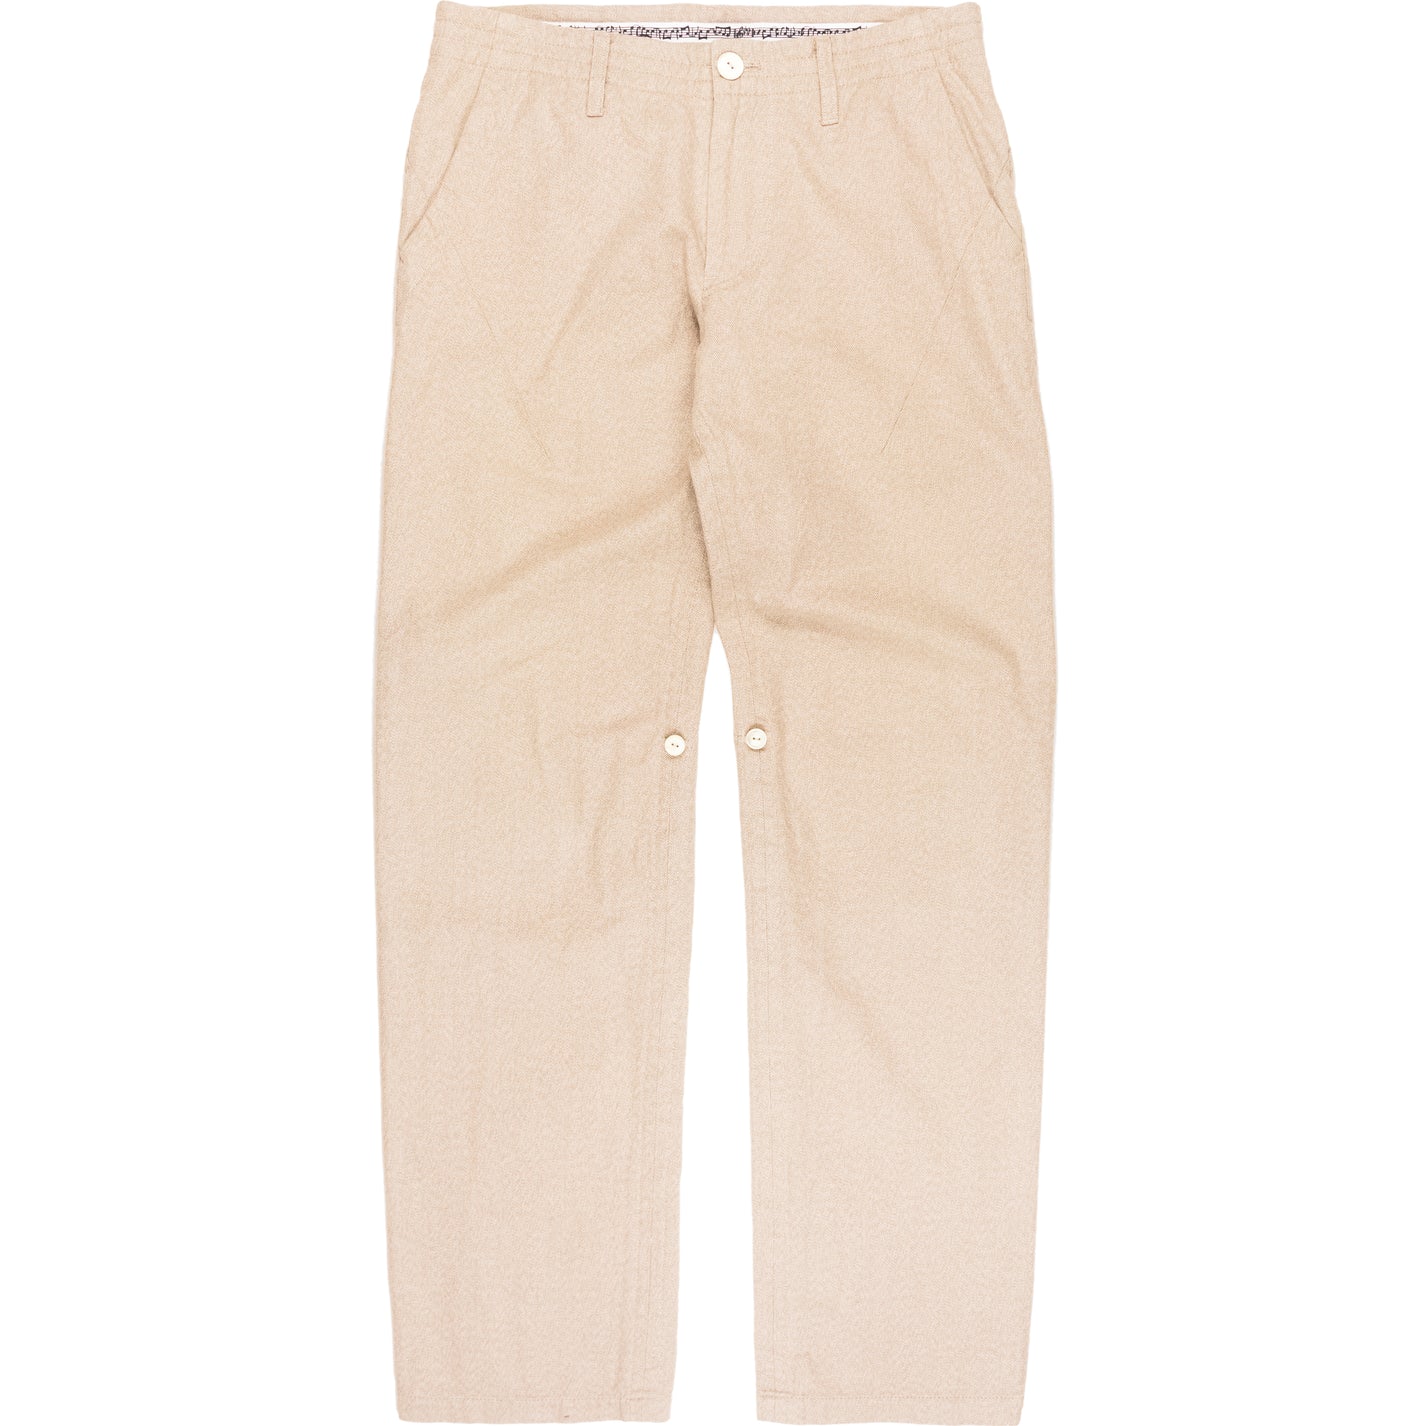 Number (N)ine Beige Darted Trouser - SS07 “About A Boy” - SILVER LEAGUE